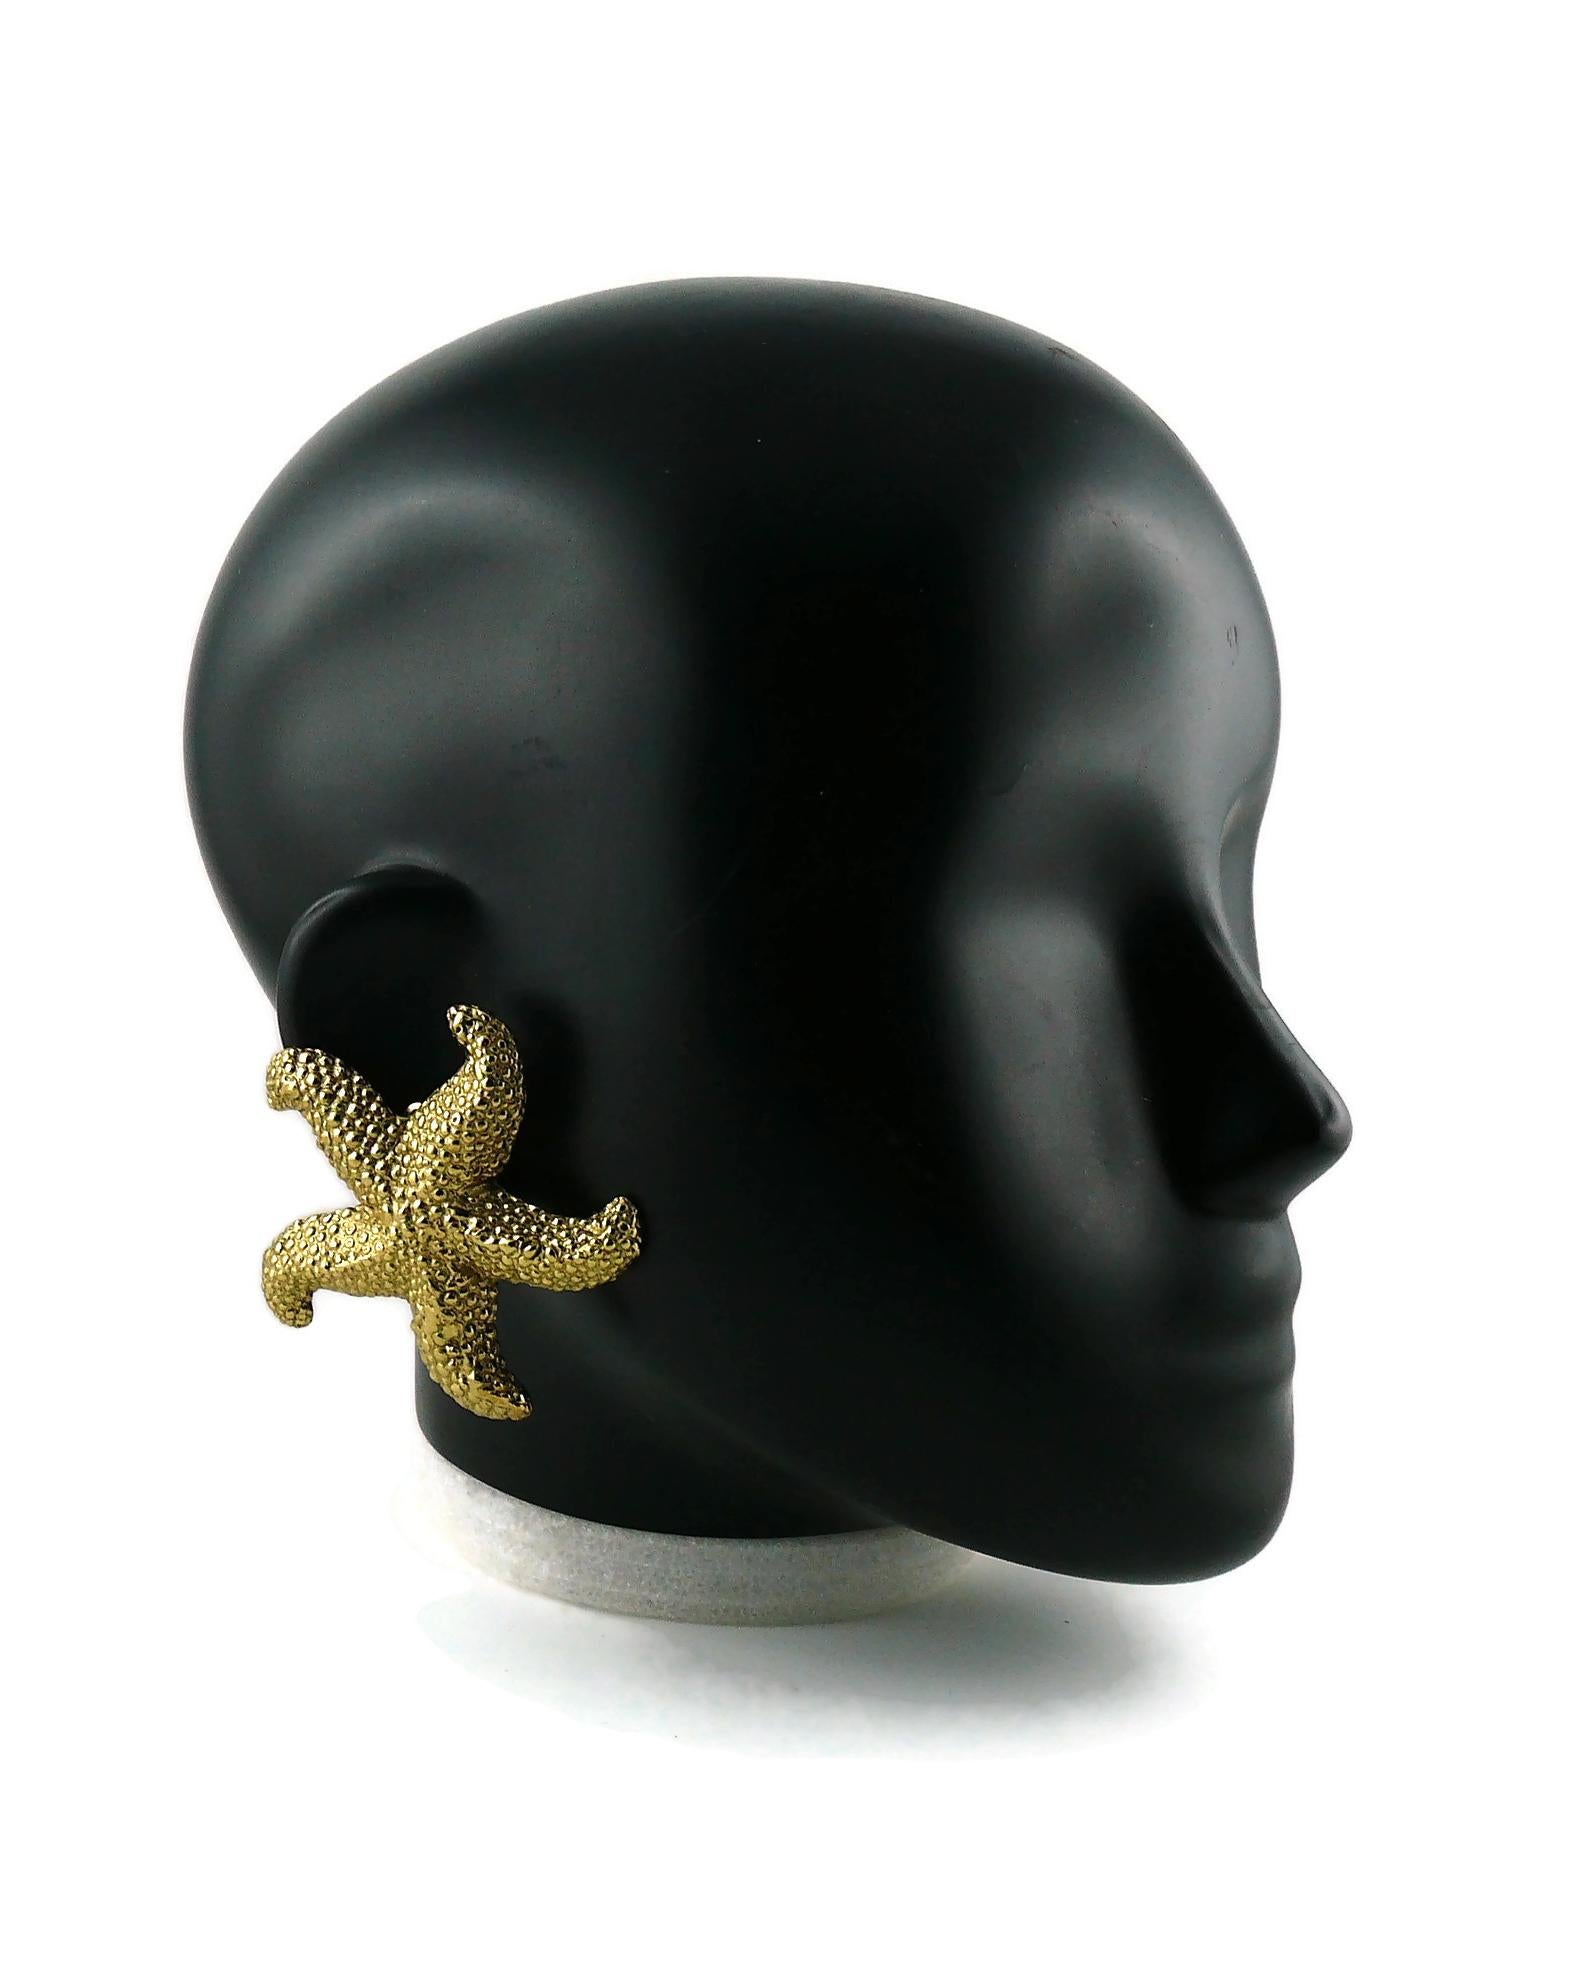 YVES SAINT LAURENT vintage massive textured gold toned clip-on earrings featuring a starfish design.

Embossed YSL.

Indicative measurements : approx. 6.2 cm (2.44 inches) x 6.2 cm (2.44 inches).

Comes with YVES SAINT LAURENT box (used